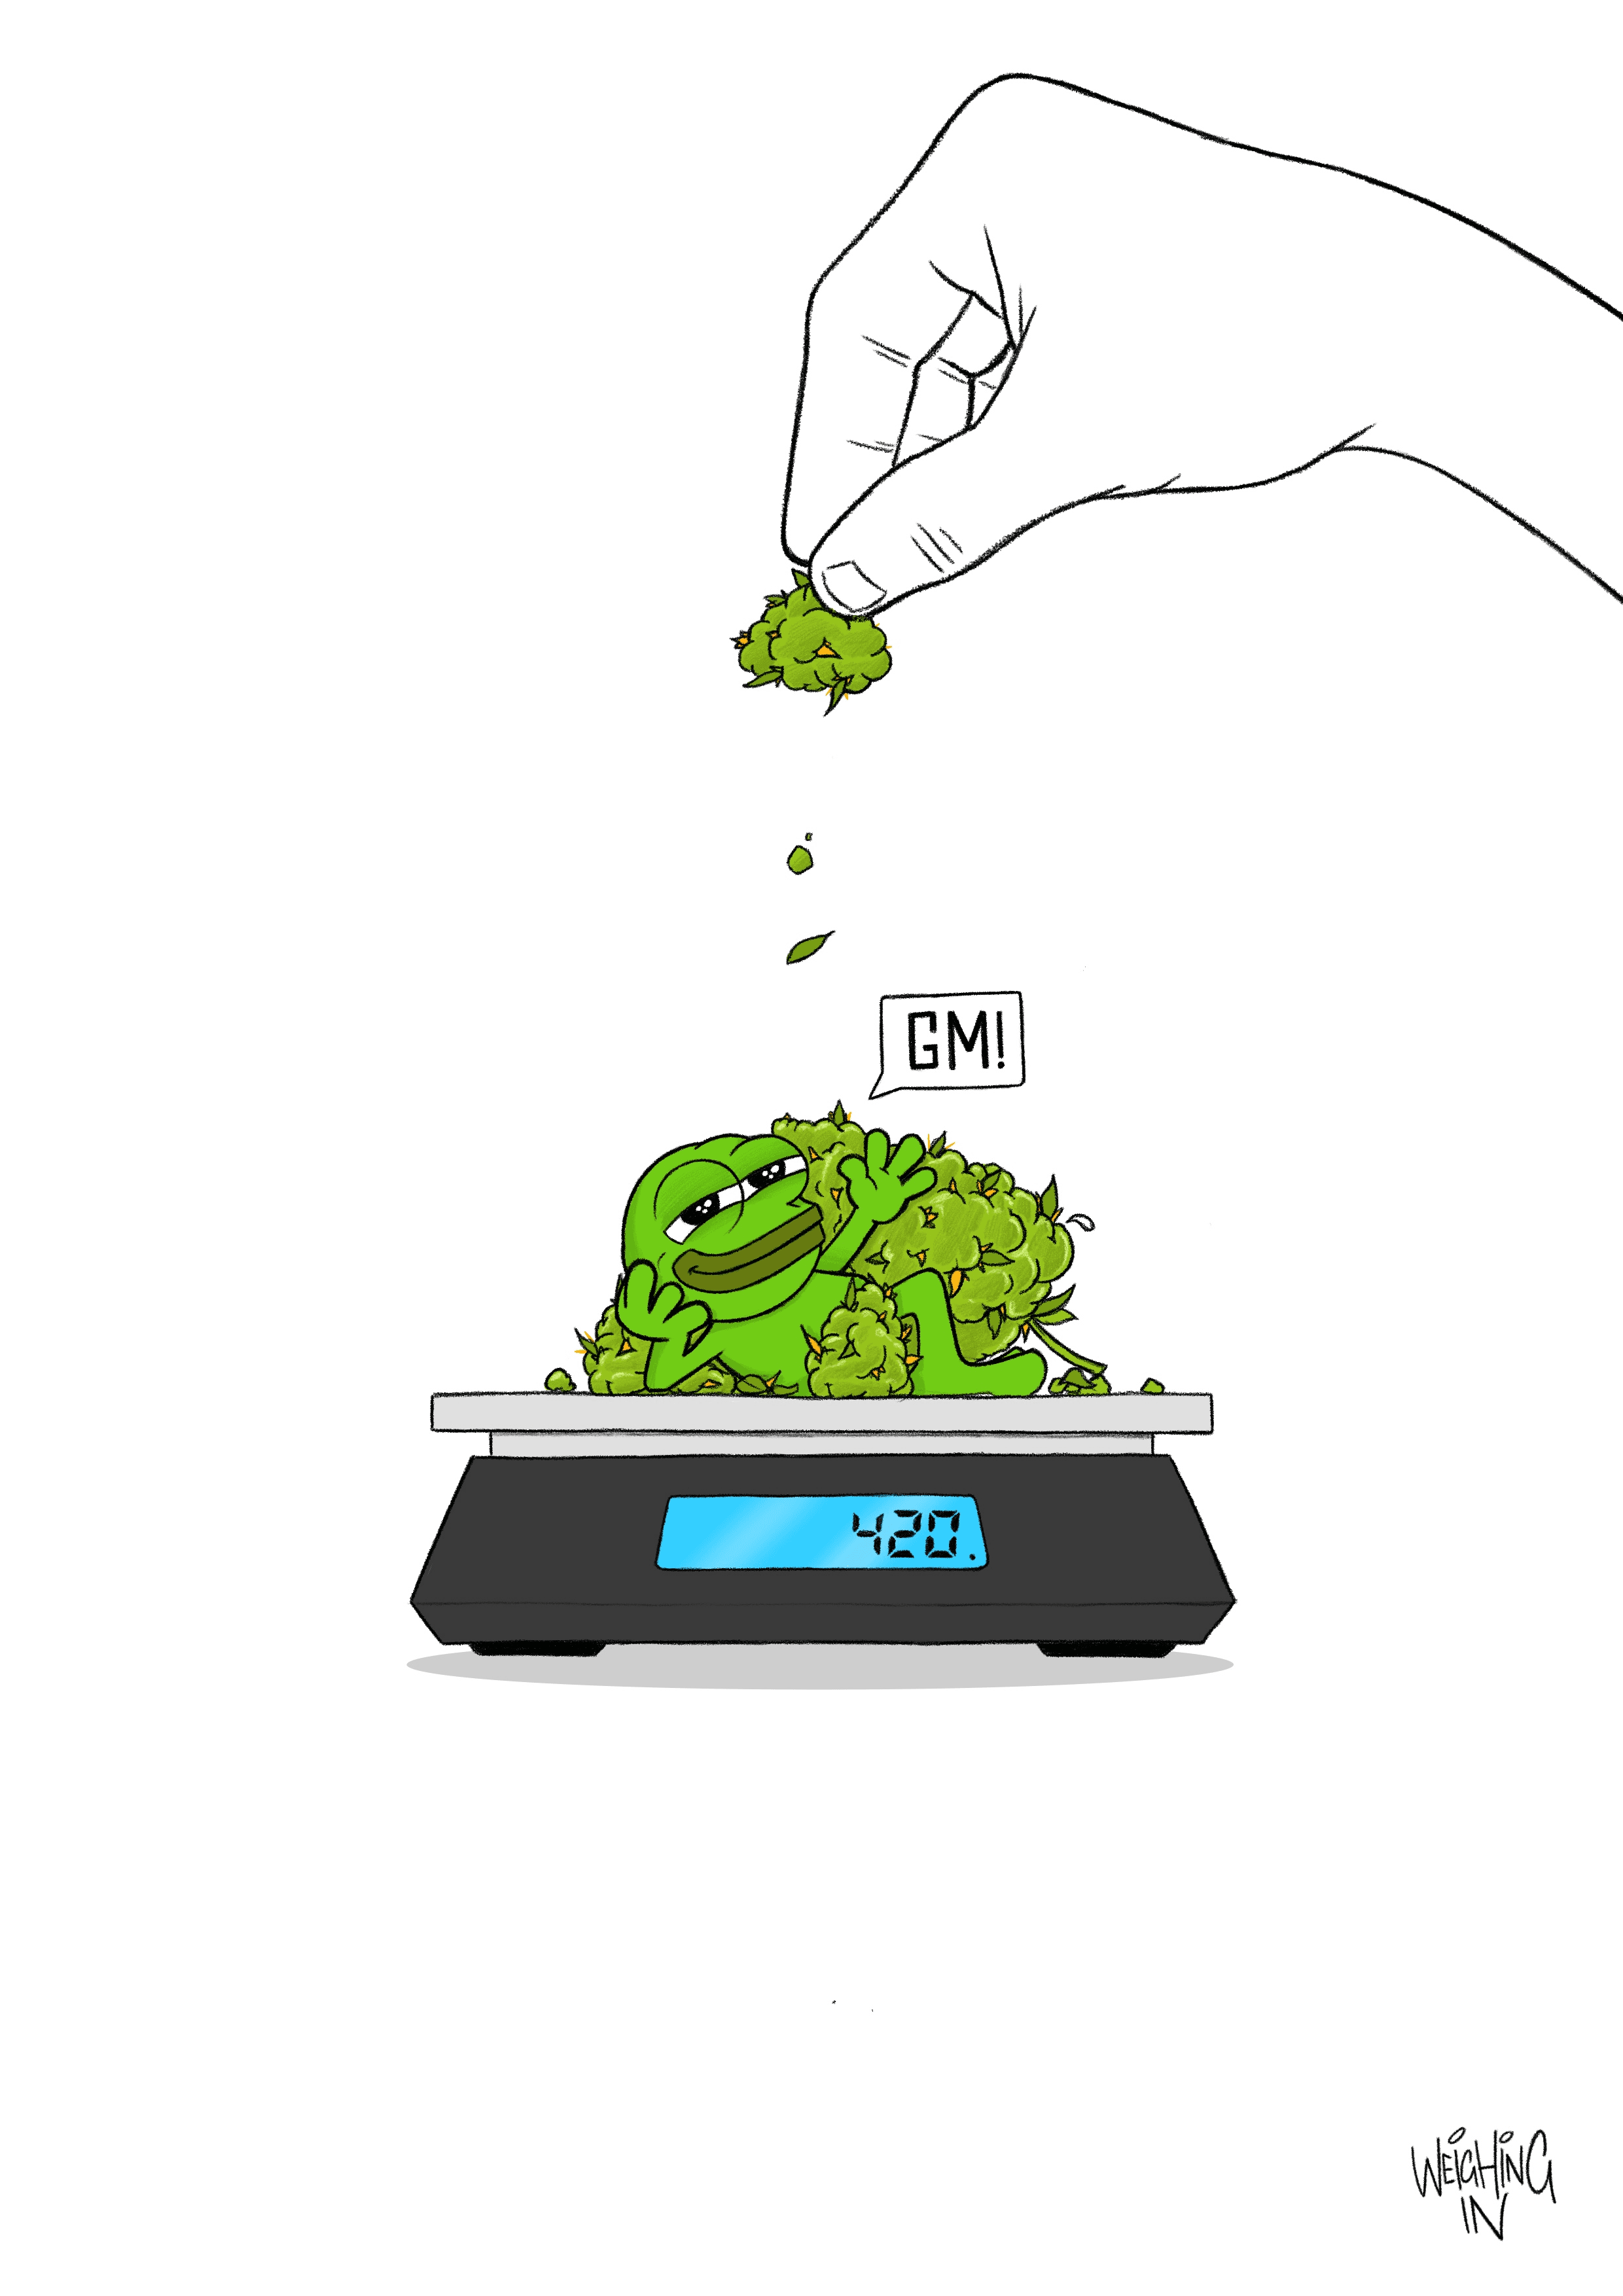 Weighing In